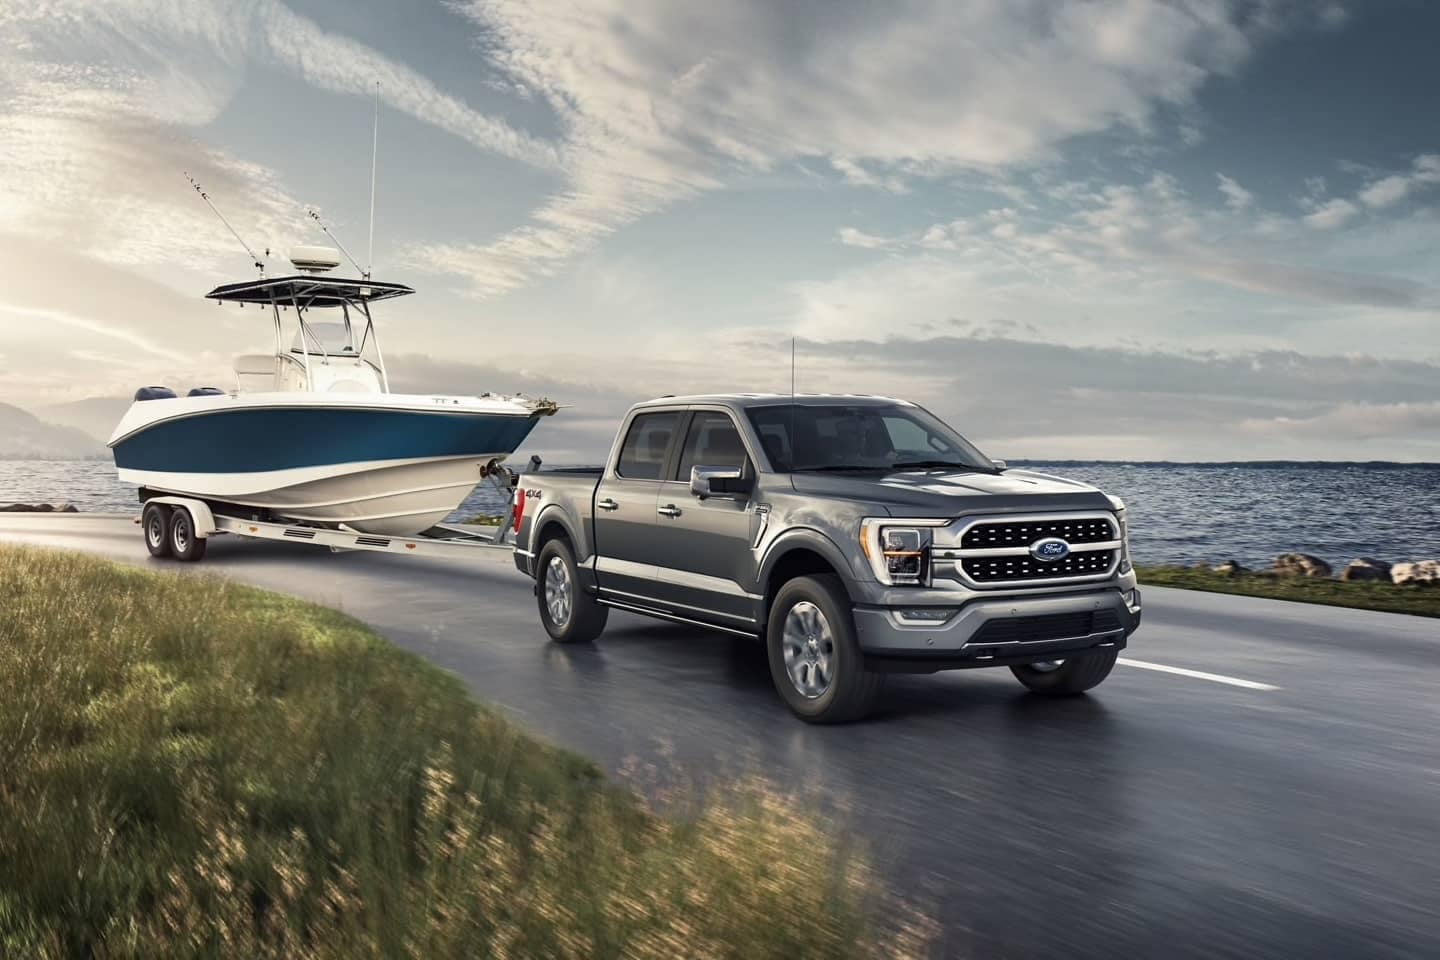 All-new F-150 Platinum towing a boat down a road next to a large body of water.